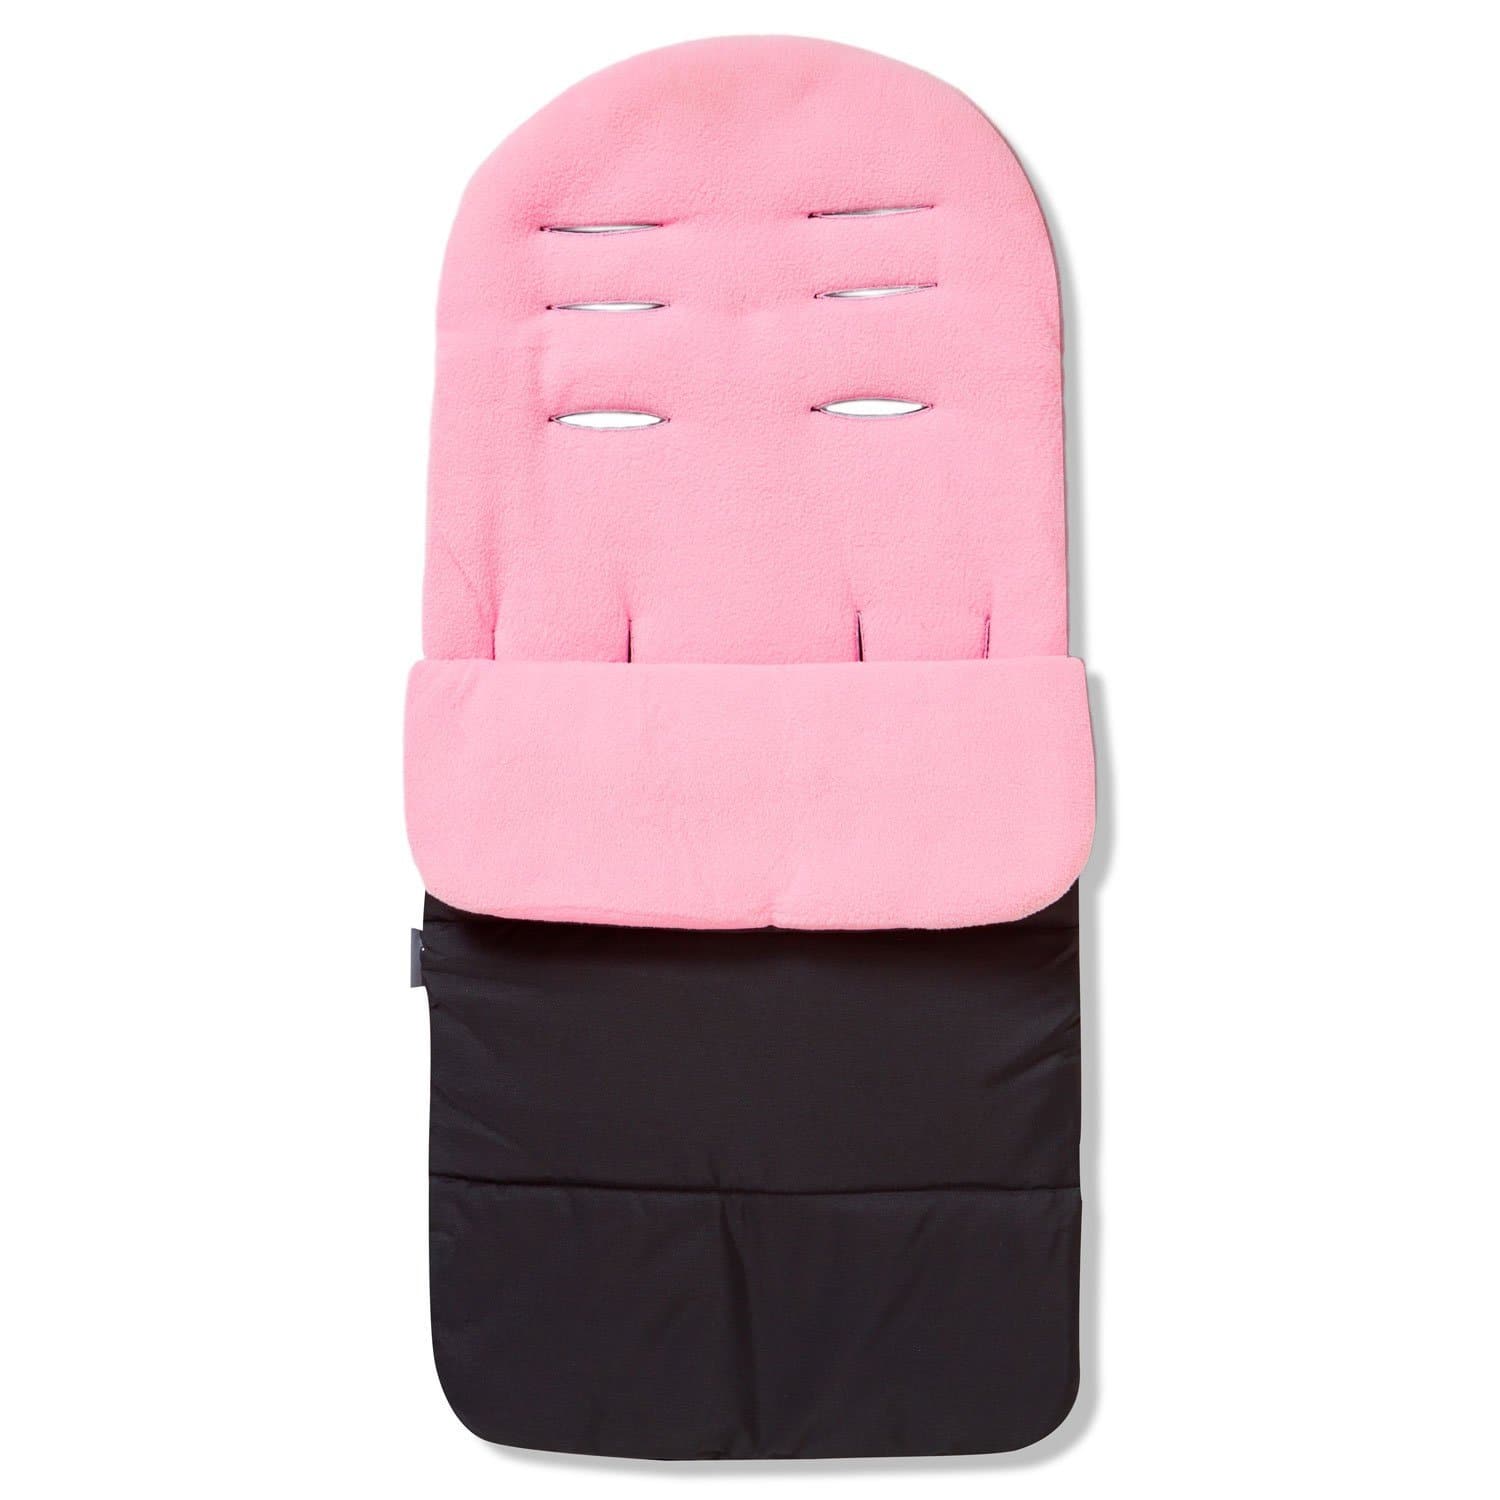 Premium Footmuff / Cosy Toes Compatible with Firstwheels - Candy Pink / Fits All Models | For Your Little One